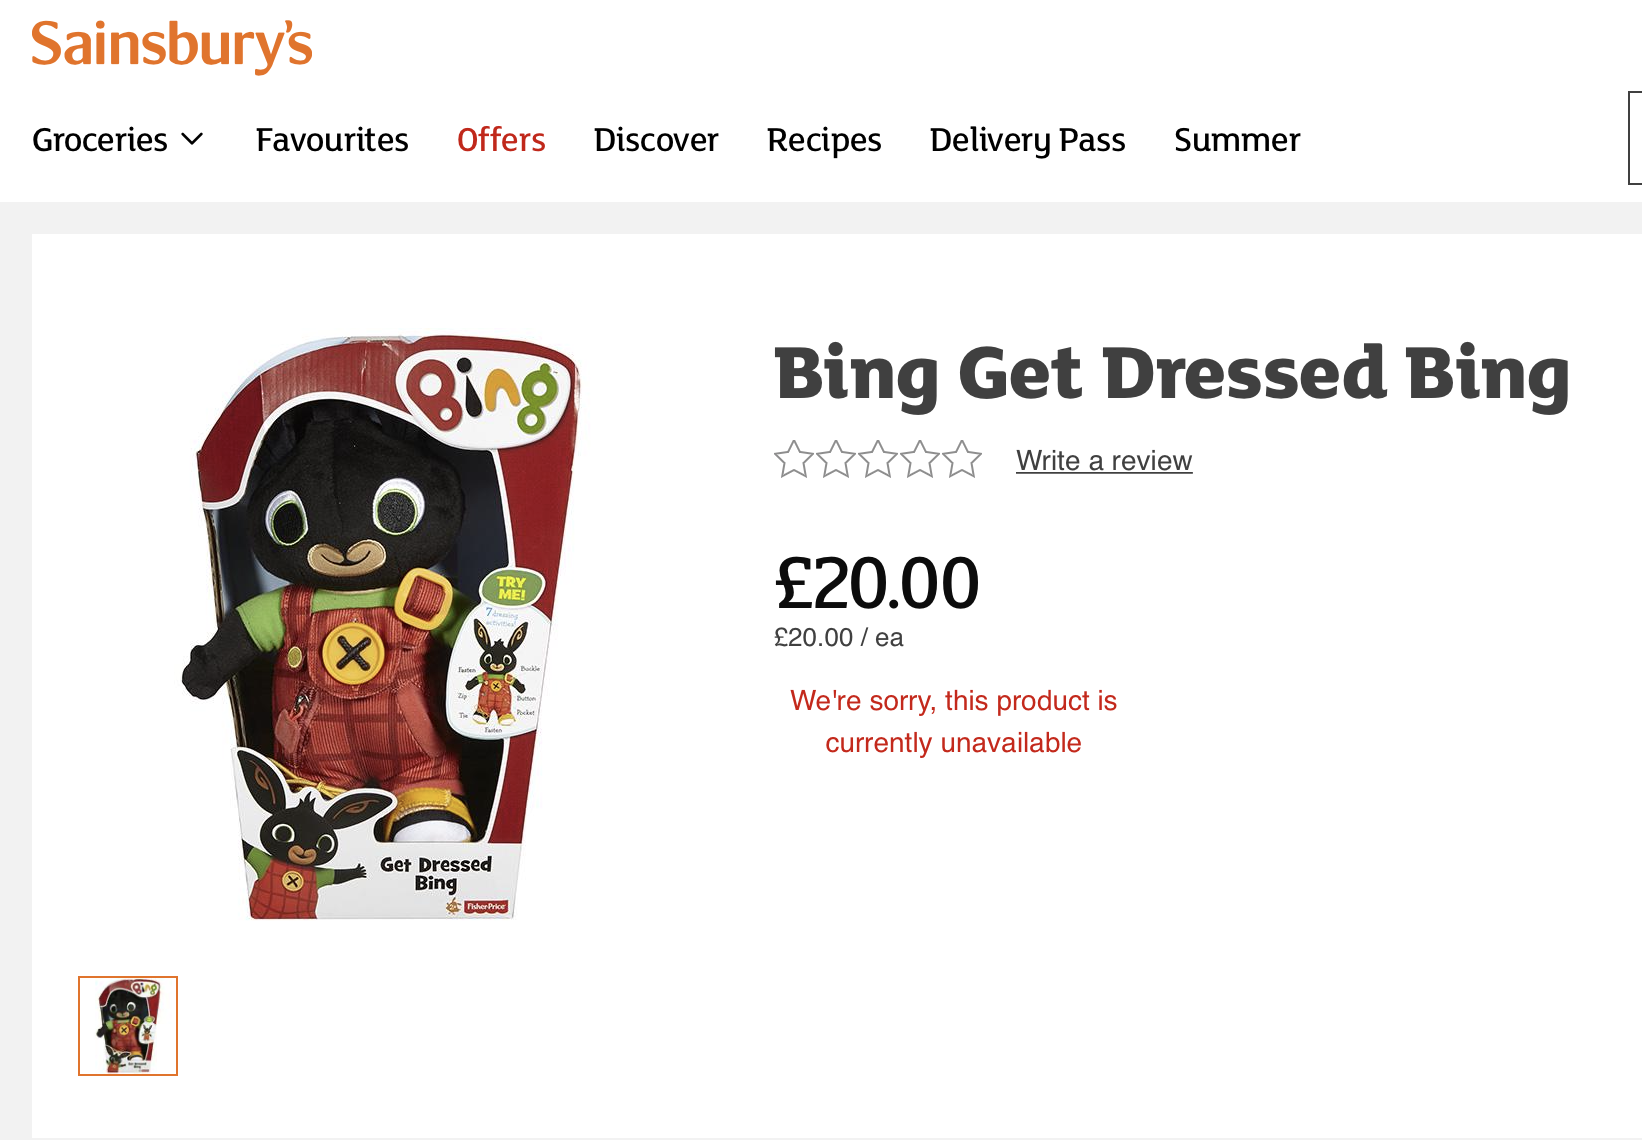 The Bing Bunny toy sold by Sainsbury’s that was at the rot of Ms Cunnington’s unfair dismissal case